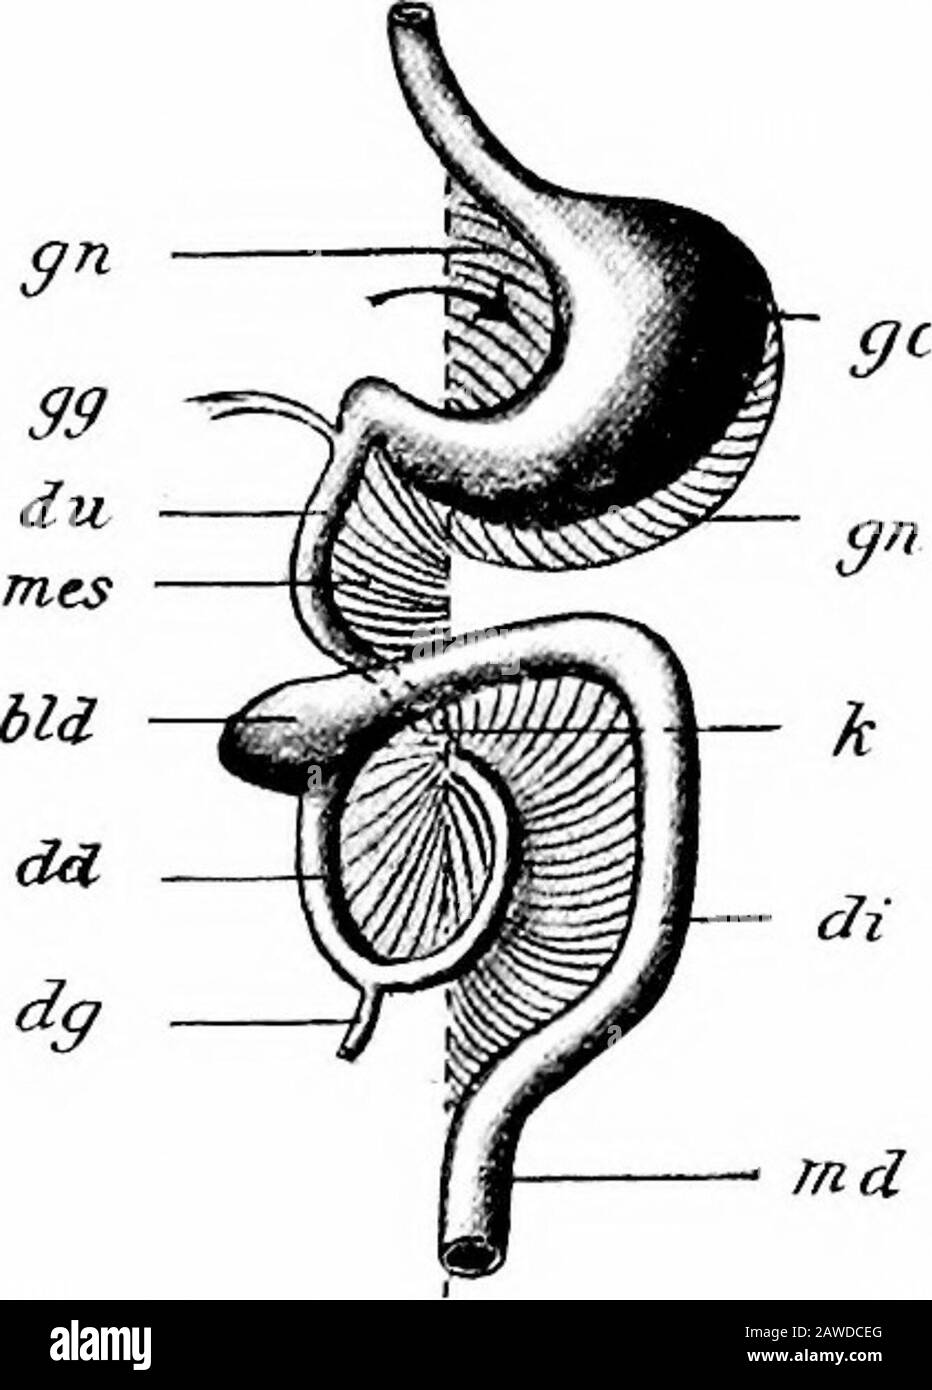 The development of the human body; a manual of human embryology . Fig. 184.—Diagram show-ing the Arrangementof the Mesentery andVisceral Branches ofthe Abdominal Aortain an Embryo of SixWeeks. p, Pancreas; S, stomach;Sp, spleen.—{Toldt.) THE PERITONEUM. 345 of the funnel, where the portion of the mesentery whichpasses to the transverse colon and arches over the duode-num fuses with the ventral surface of the latter portion ofthe intestine and also with the peritoneum covering thedorsal wall of the abdomen both to the right and to theleft of the duodenum. In this way the attachment of thetransv Stock Photo